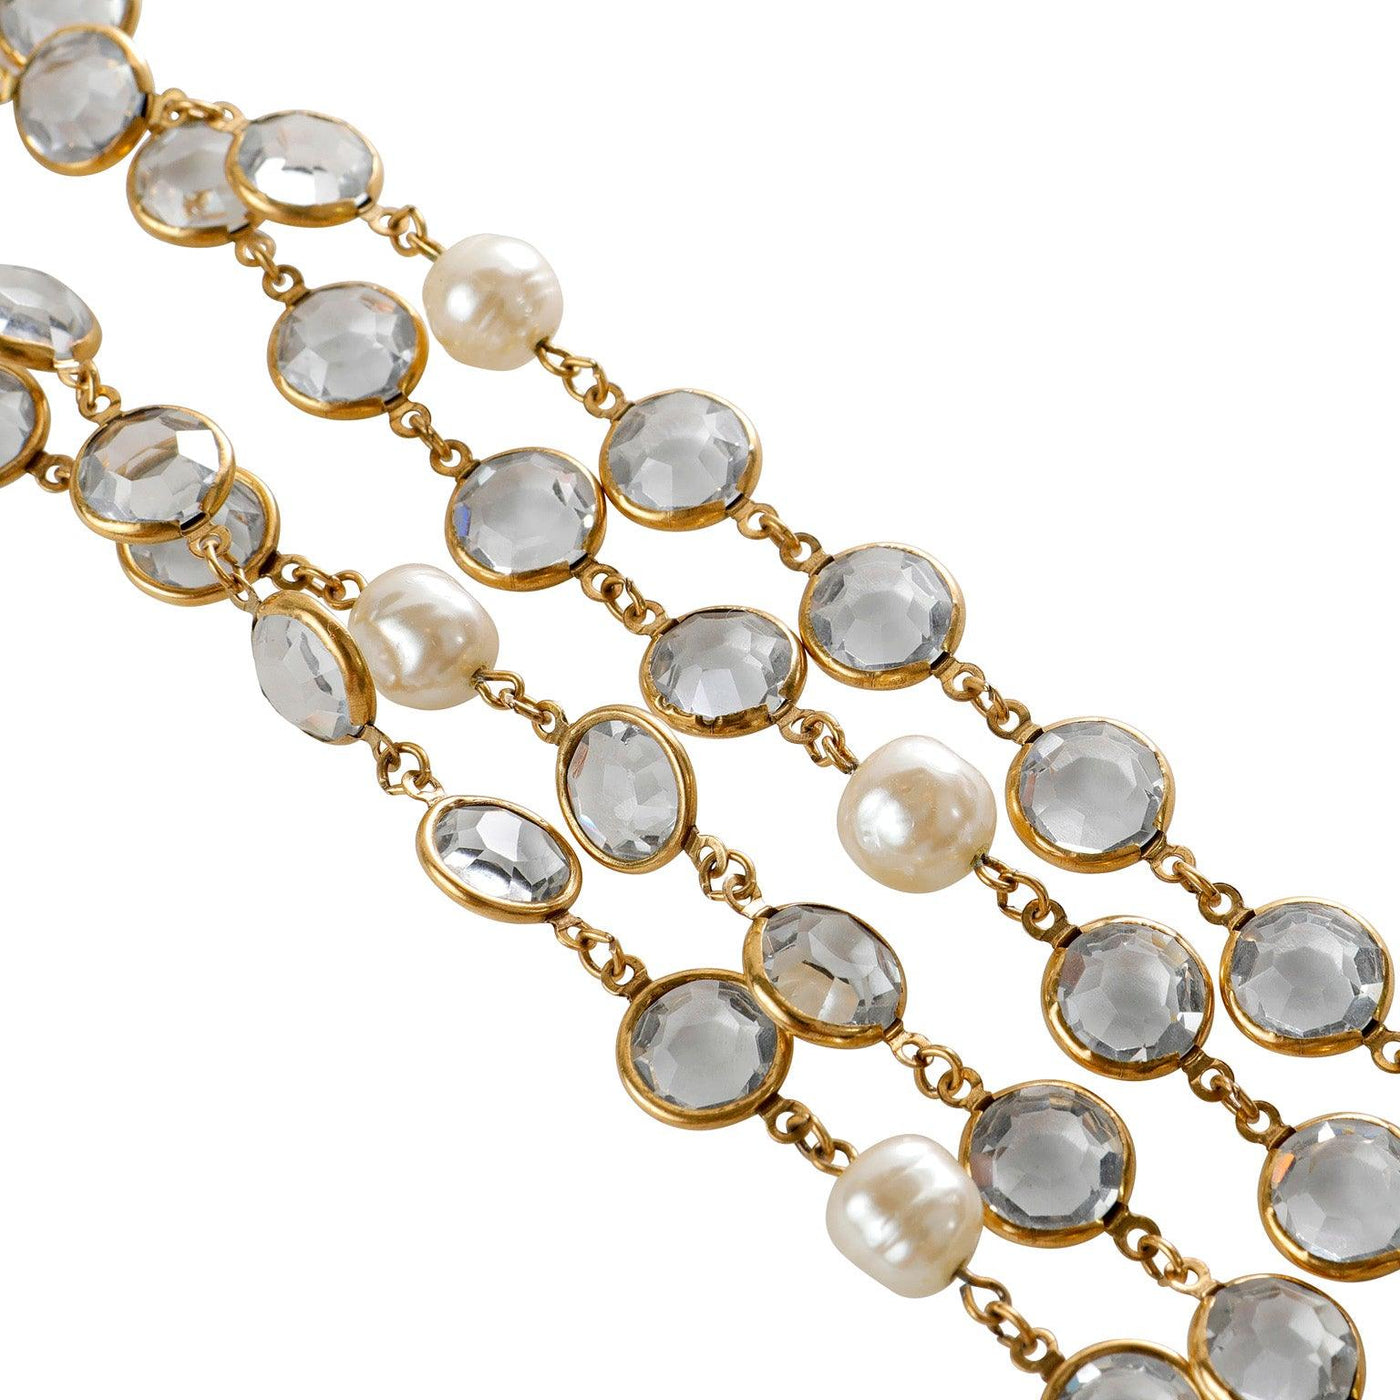 Chanel Clear Rose Cut Crystal and Pearl Vintage Long Necklace - Only Authentics